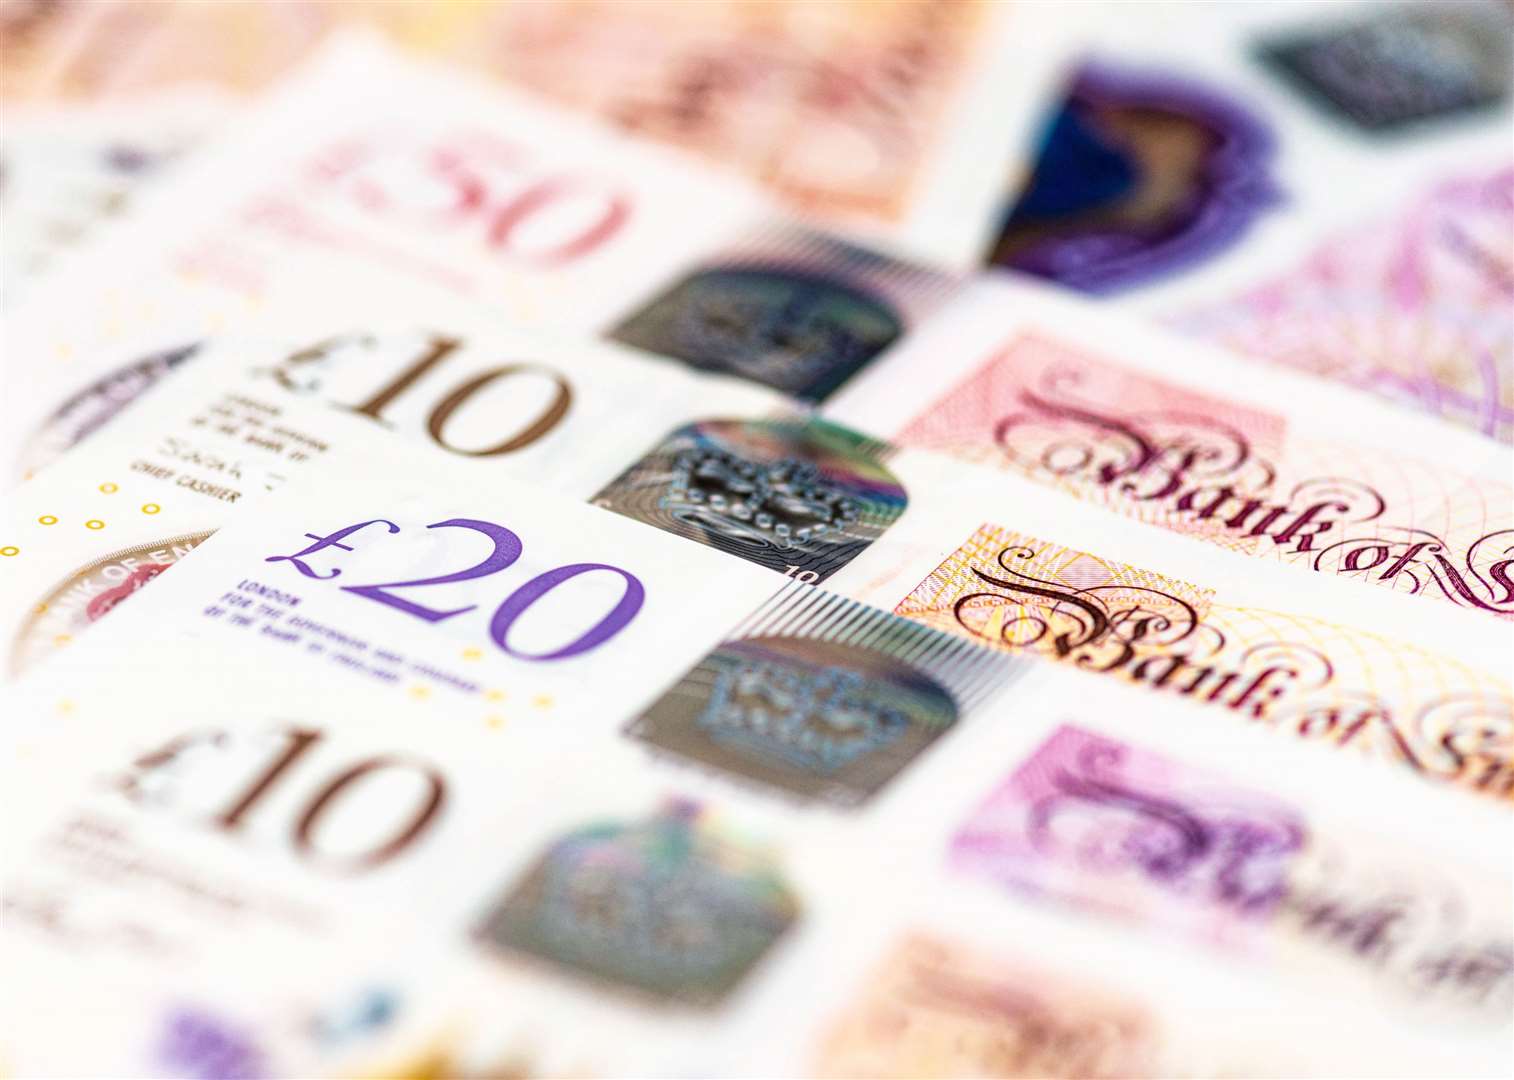 Macro image of several GBP notes issued by the Bank of England, including £10, £20 and £50 banknotes. From iStock for the Next Step